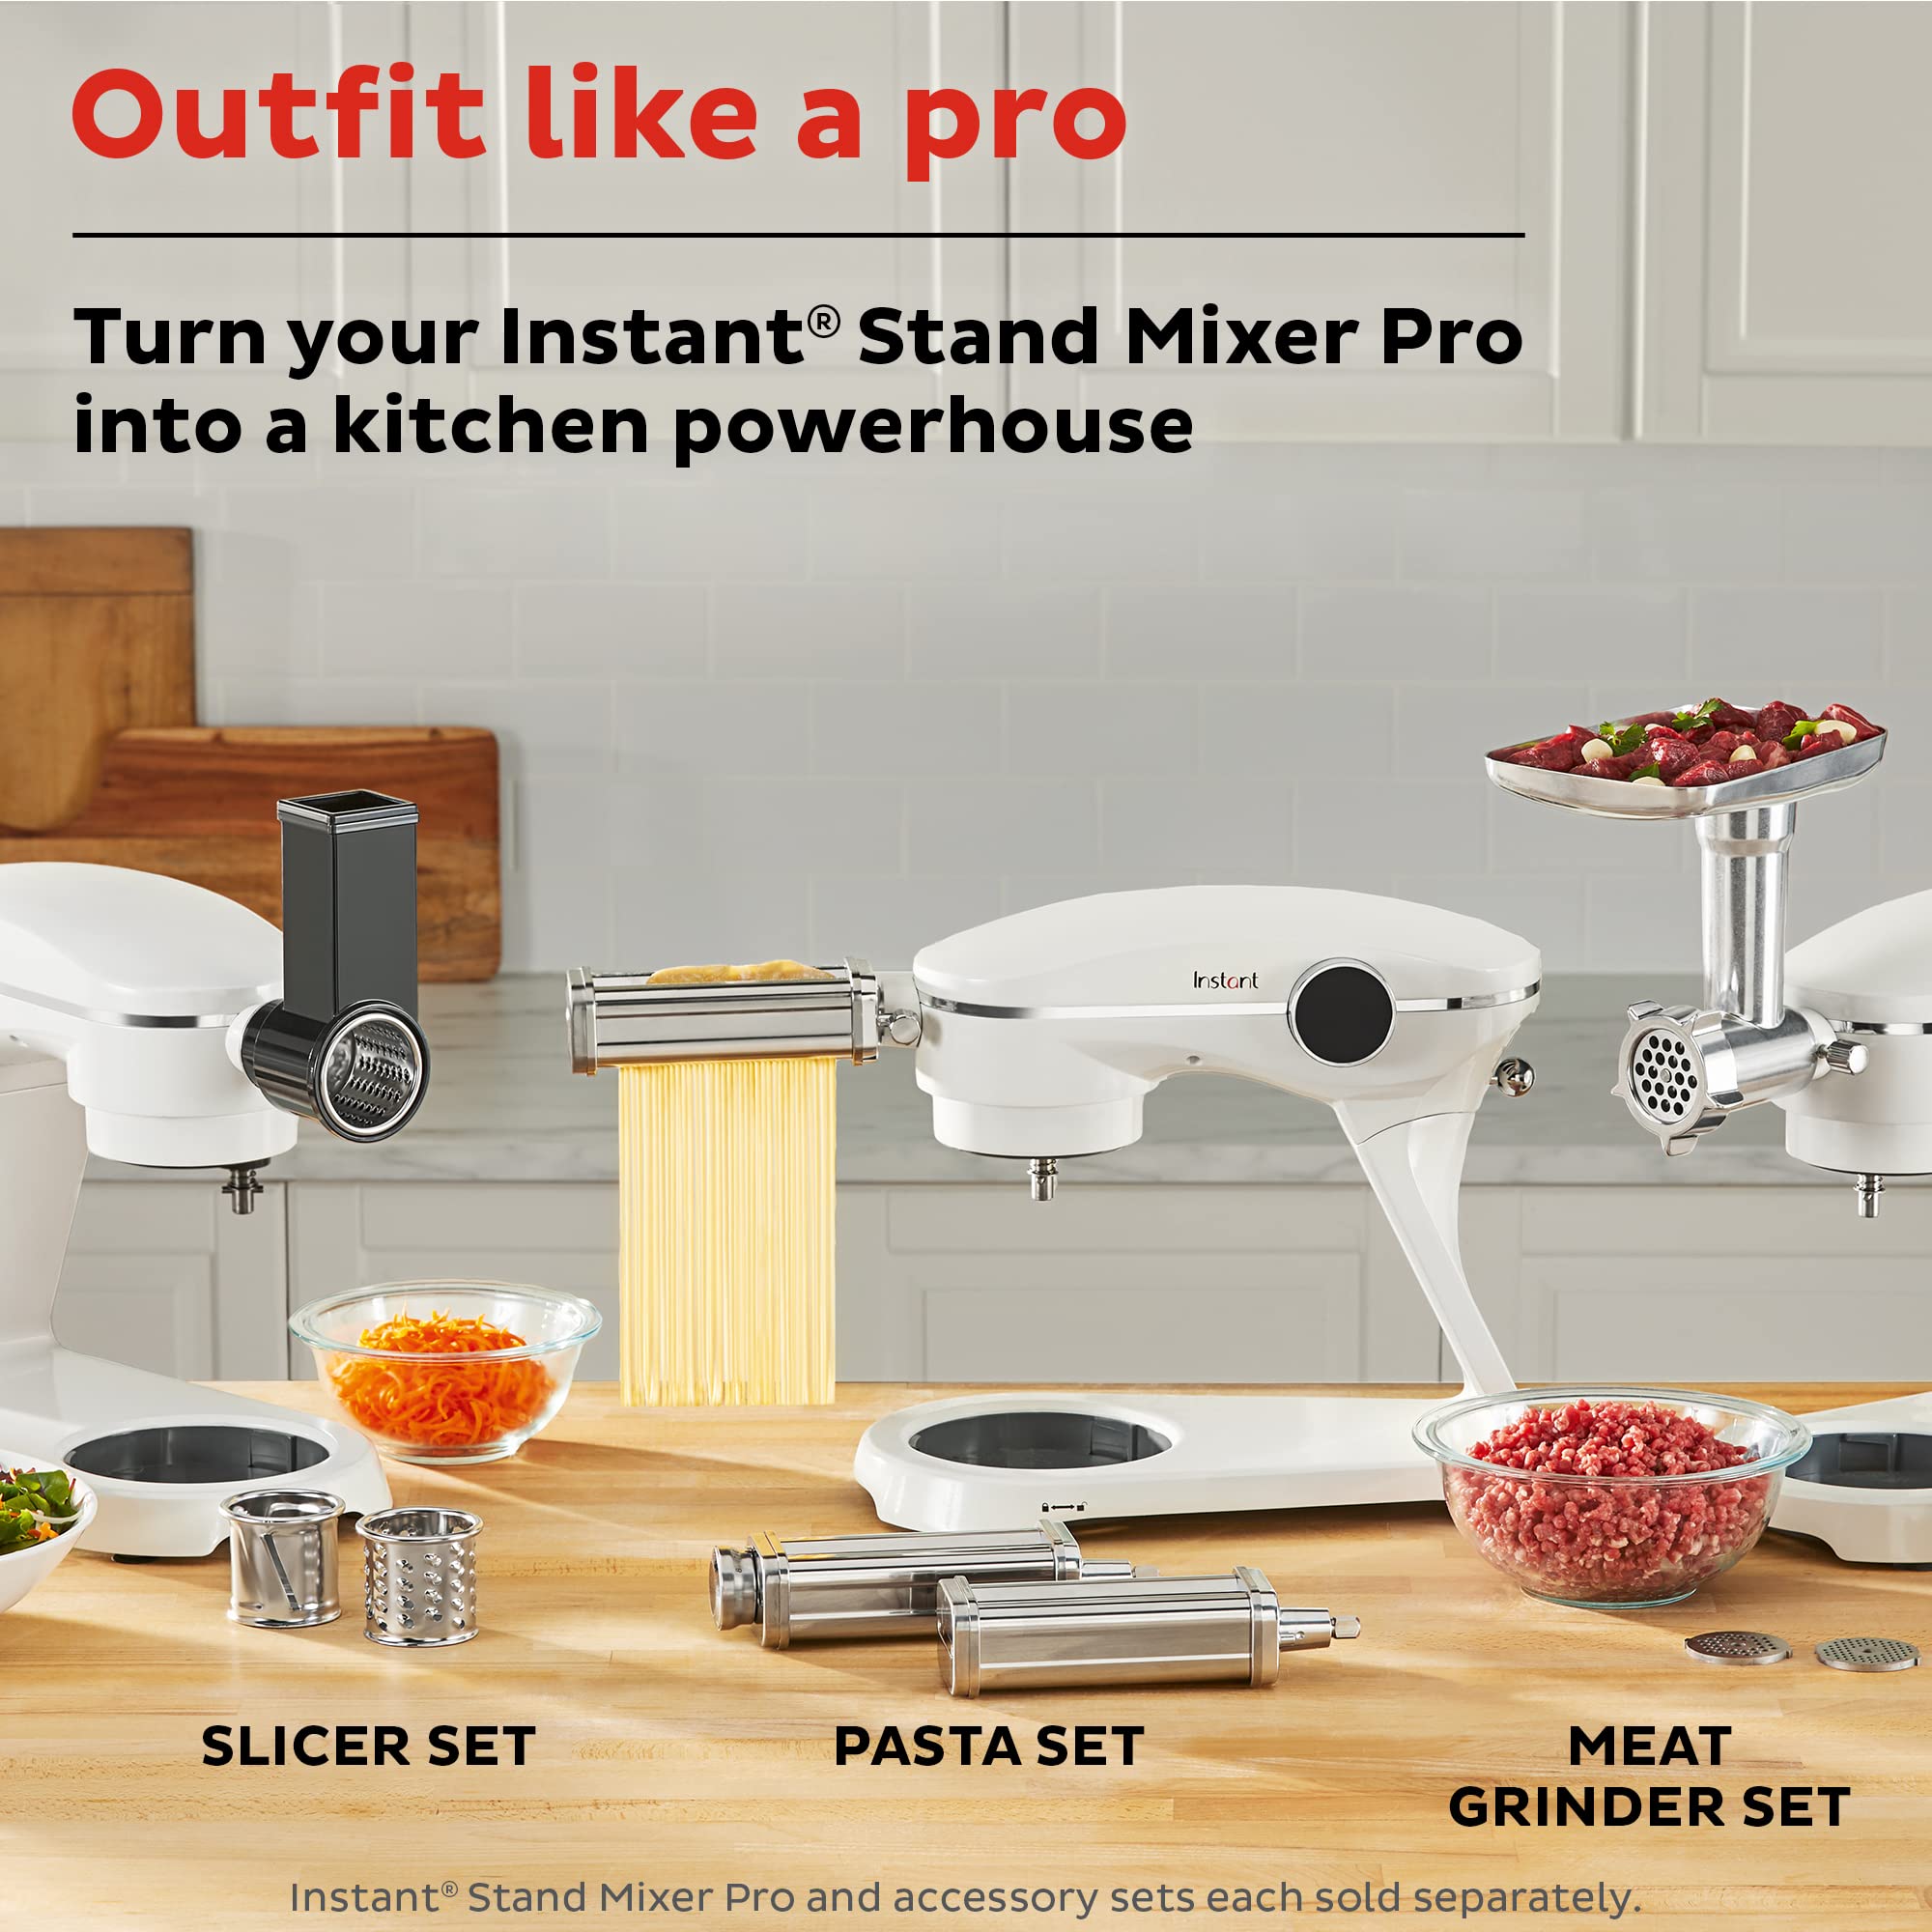 Instant Pot Slicer/ Shredder Attachment for Instant Stand Mixer Pro, Includes 2 Shredding Blades, Slicing blade, Food Pusher and Feeder Housing, Vegetable Chopper, Cheese Grater Attachment